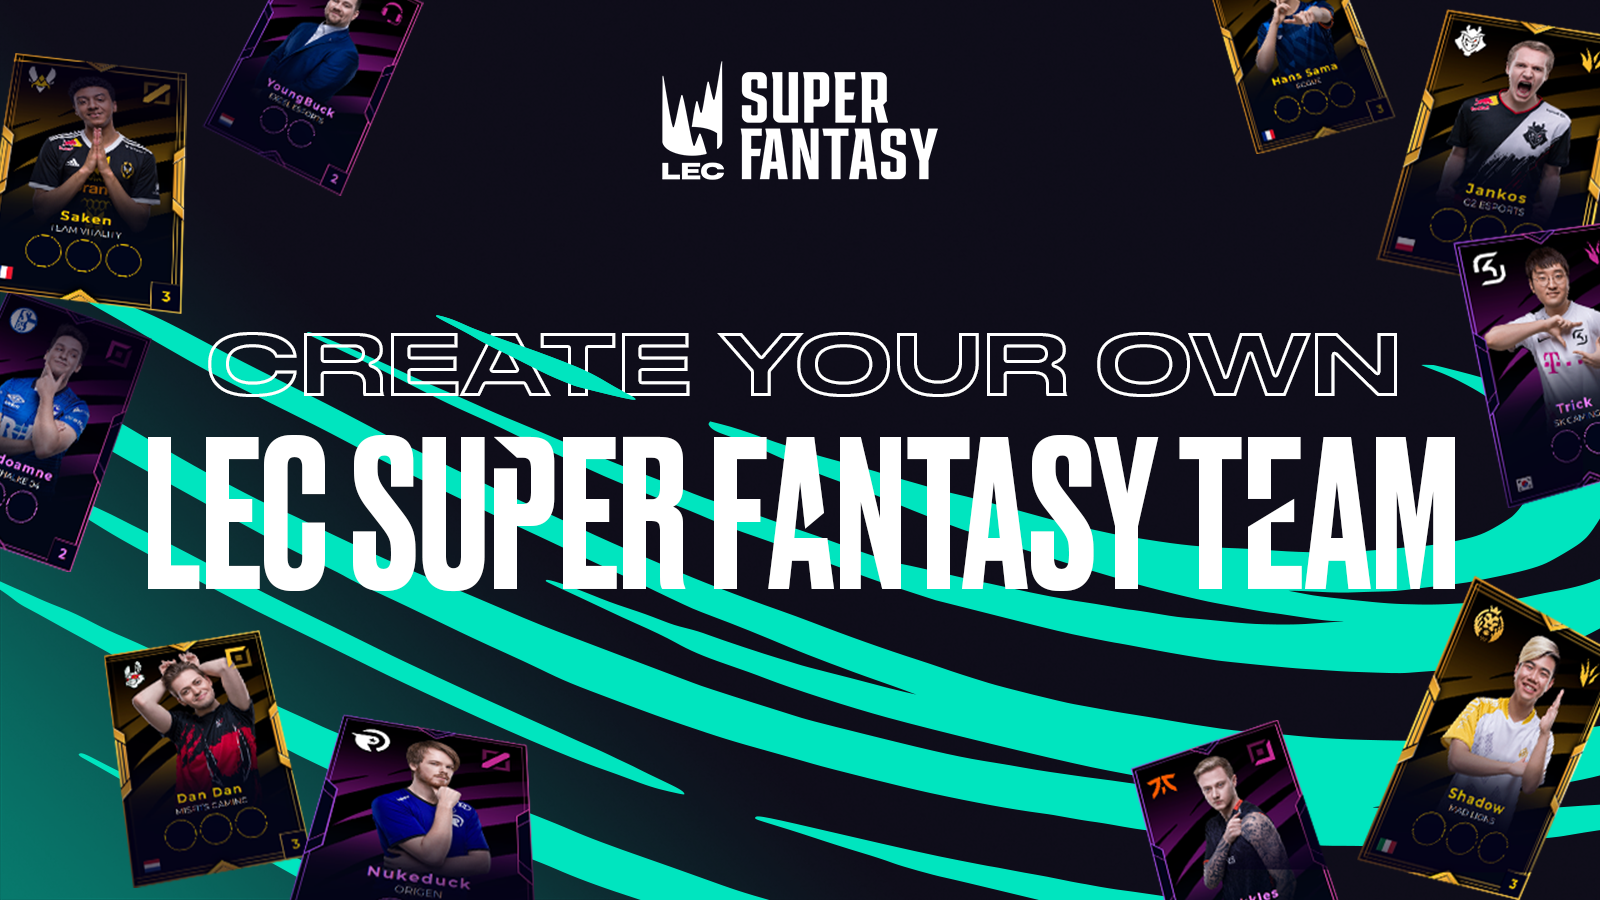 It S Time To Draft Your Dream League Team With Lec Superfantasy Esports Royalbeats In - roblox 1v1 obby race if poke wins he gets his dominus viral chop video